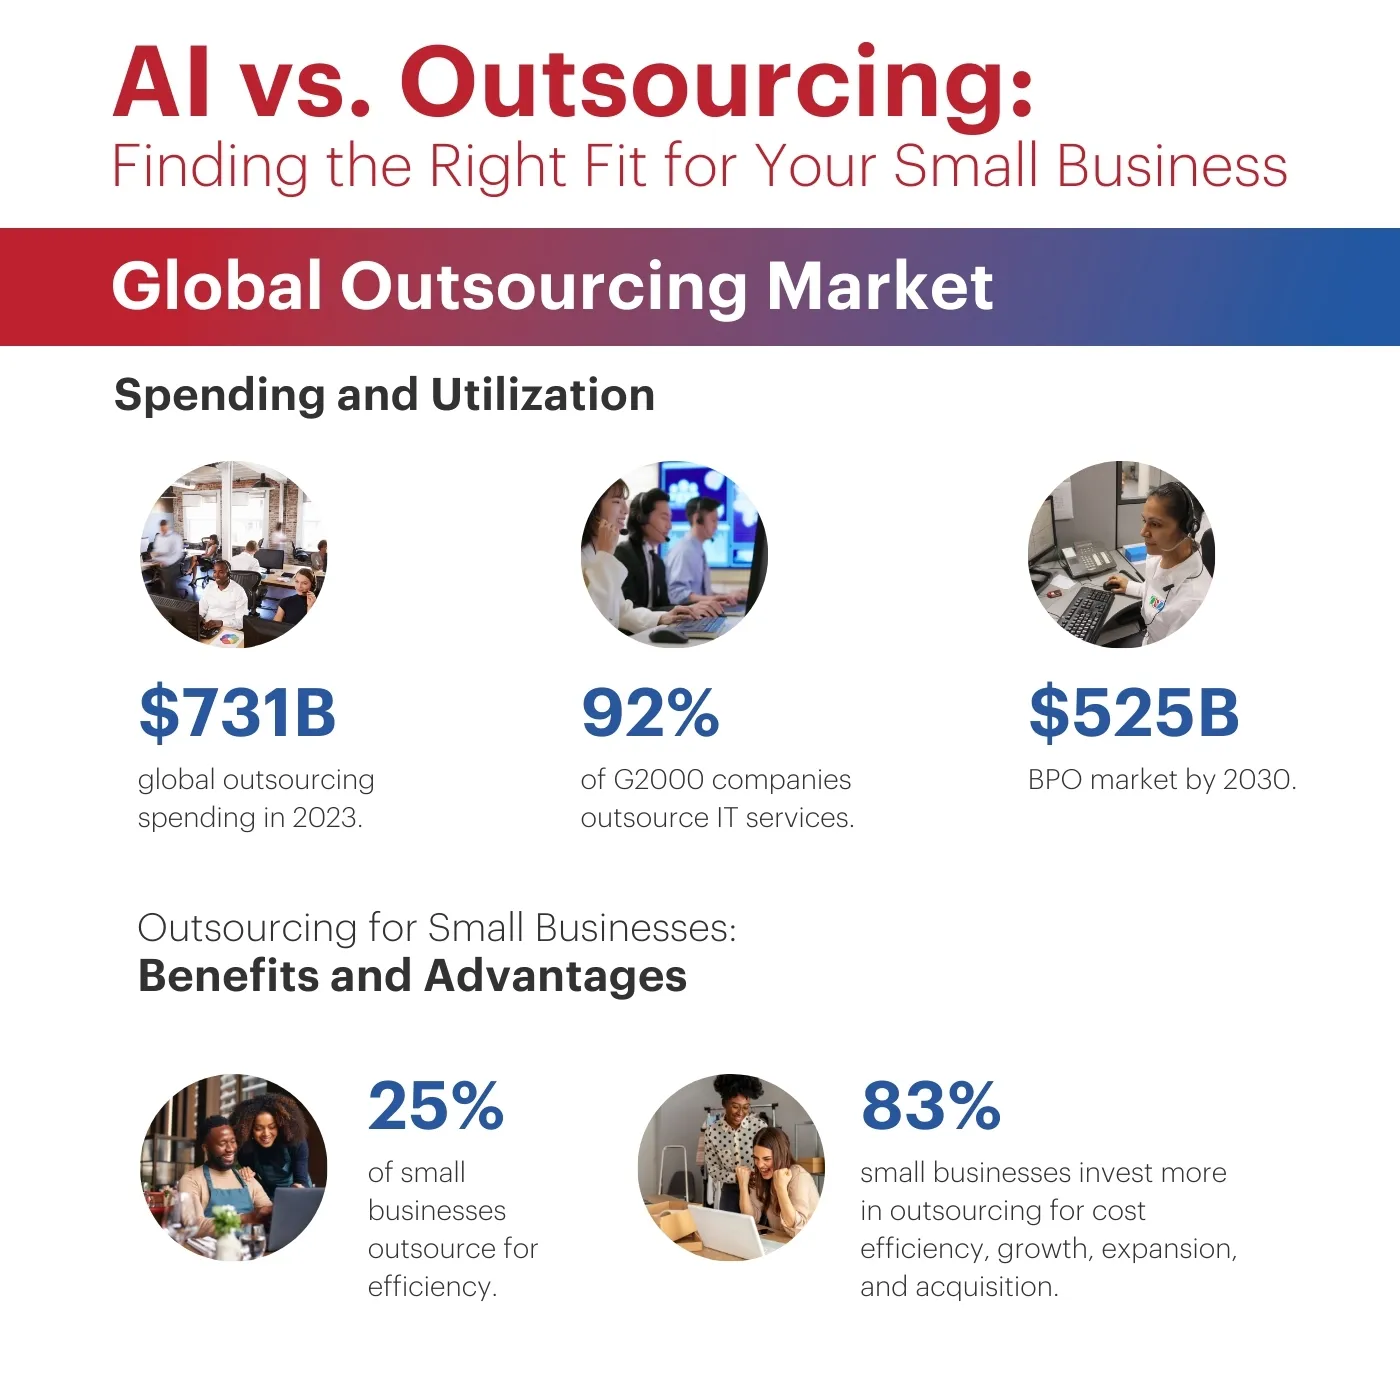 An infographic shows Global Outsourcing Market for Small Businesses.